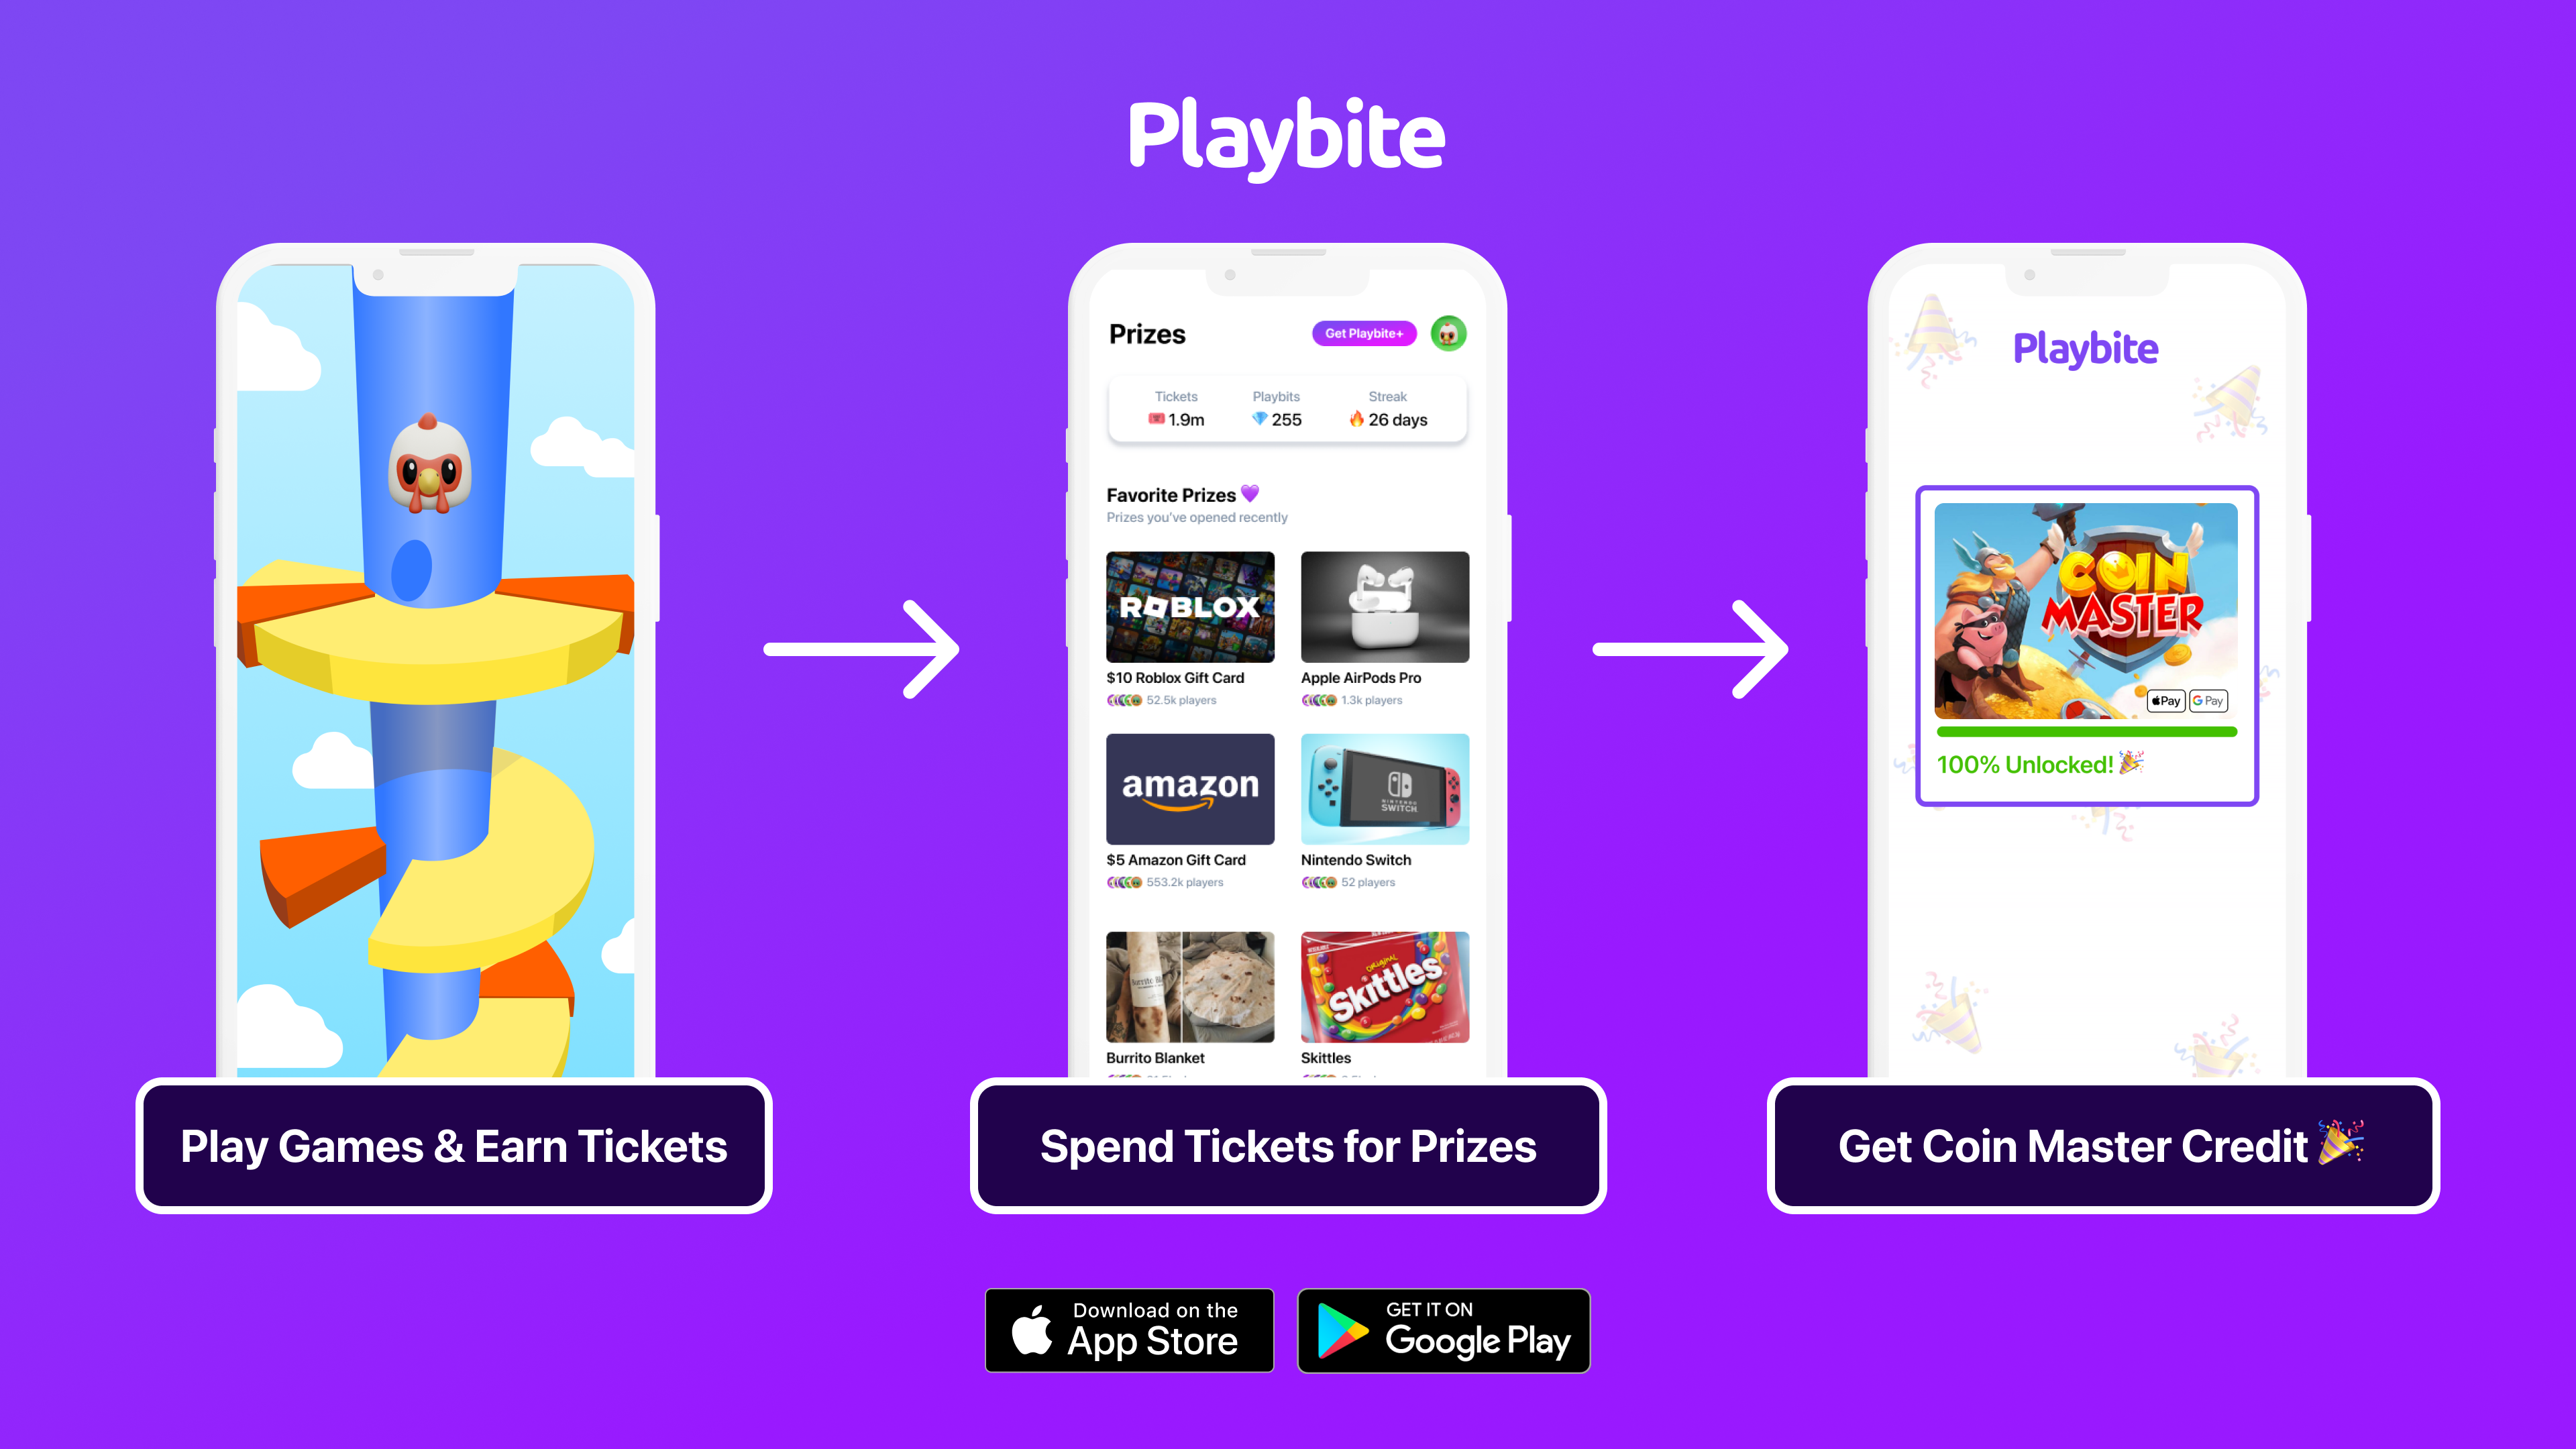 Win Coin Master spins by playing games on Playbite!